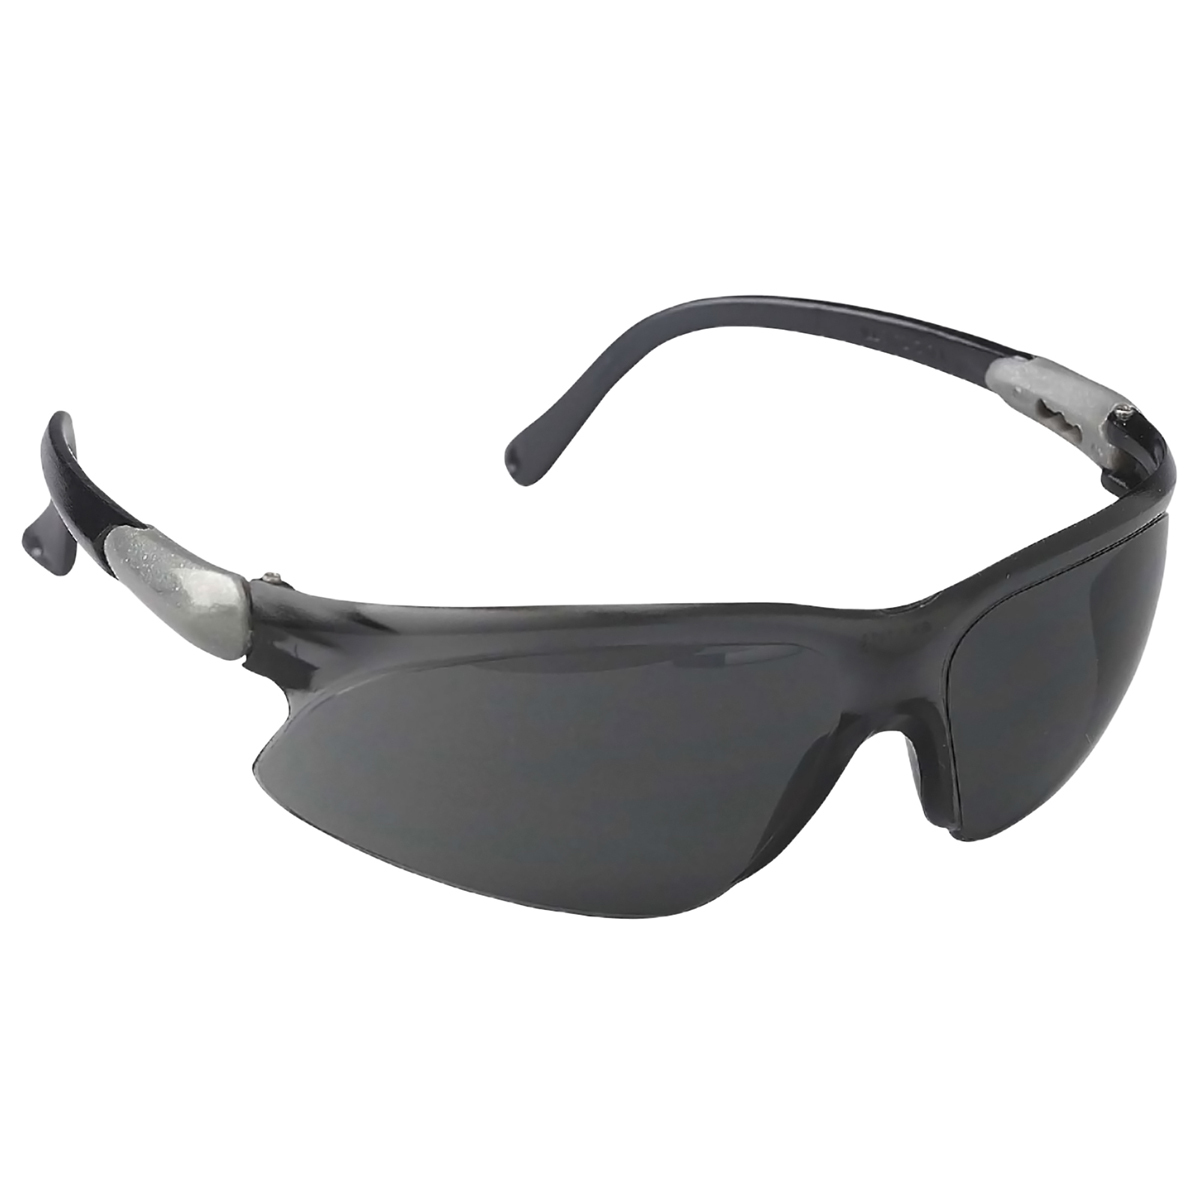 Kimberly-Clark Professional* KleenGuard™ Visio* Silver Safety Glasses With Smoke Hard Coat Lens (Availability restrictions apply